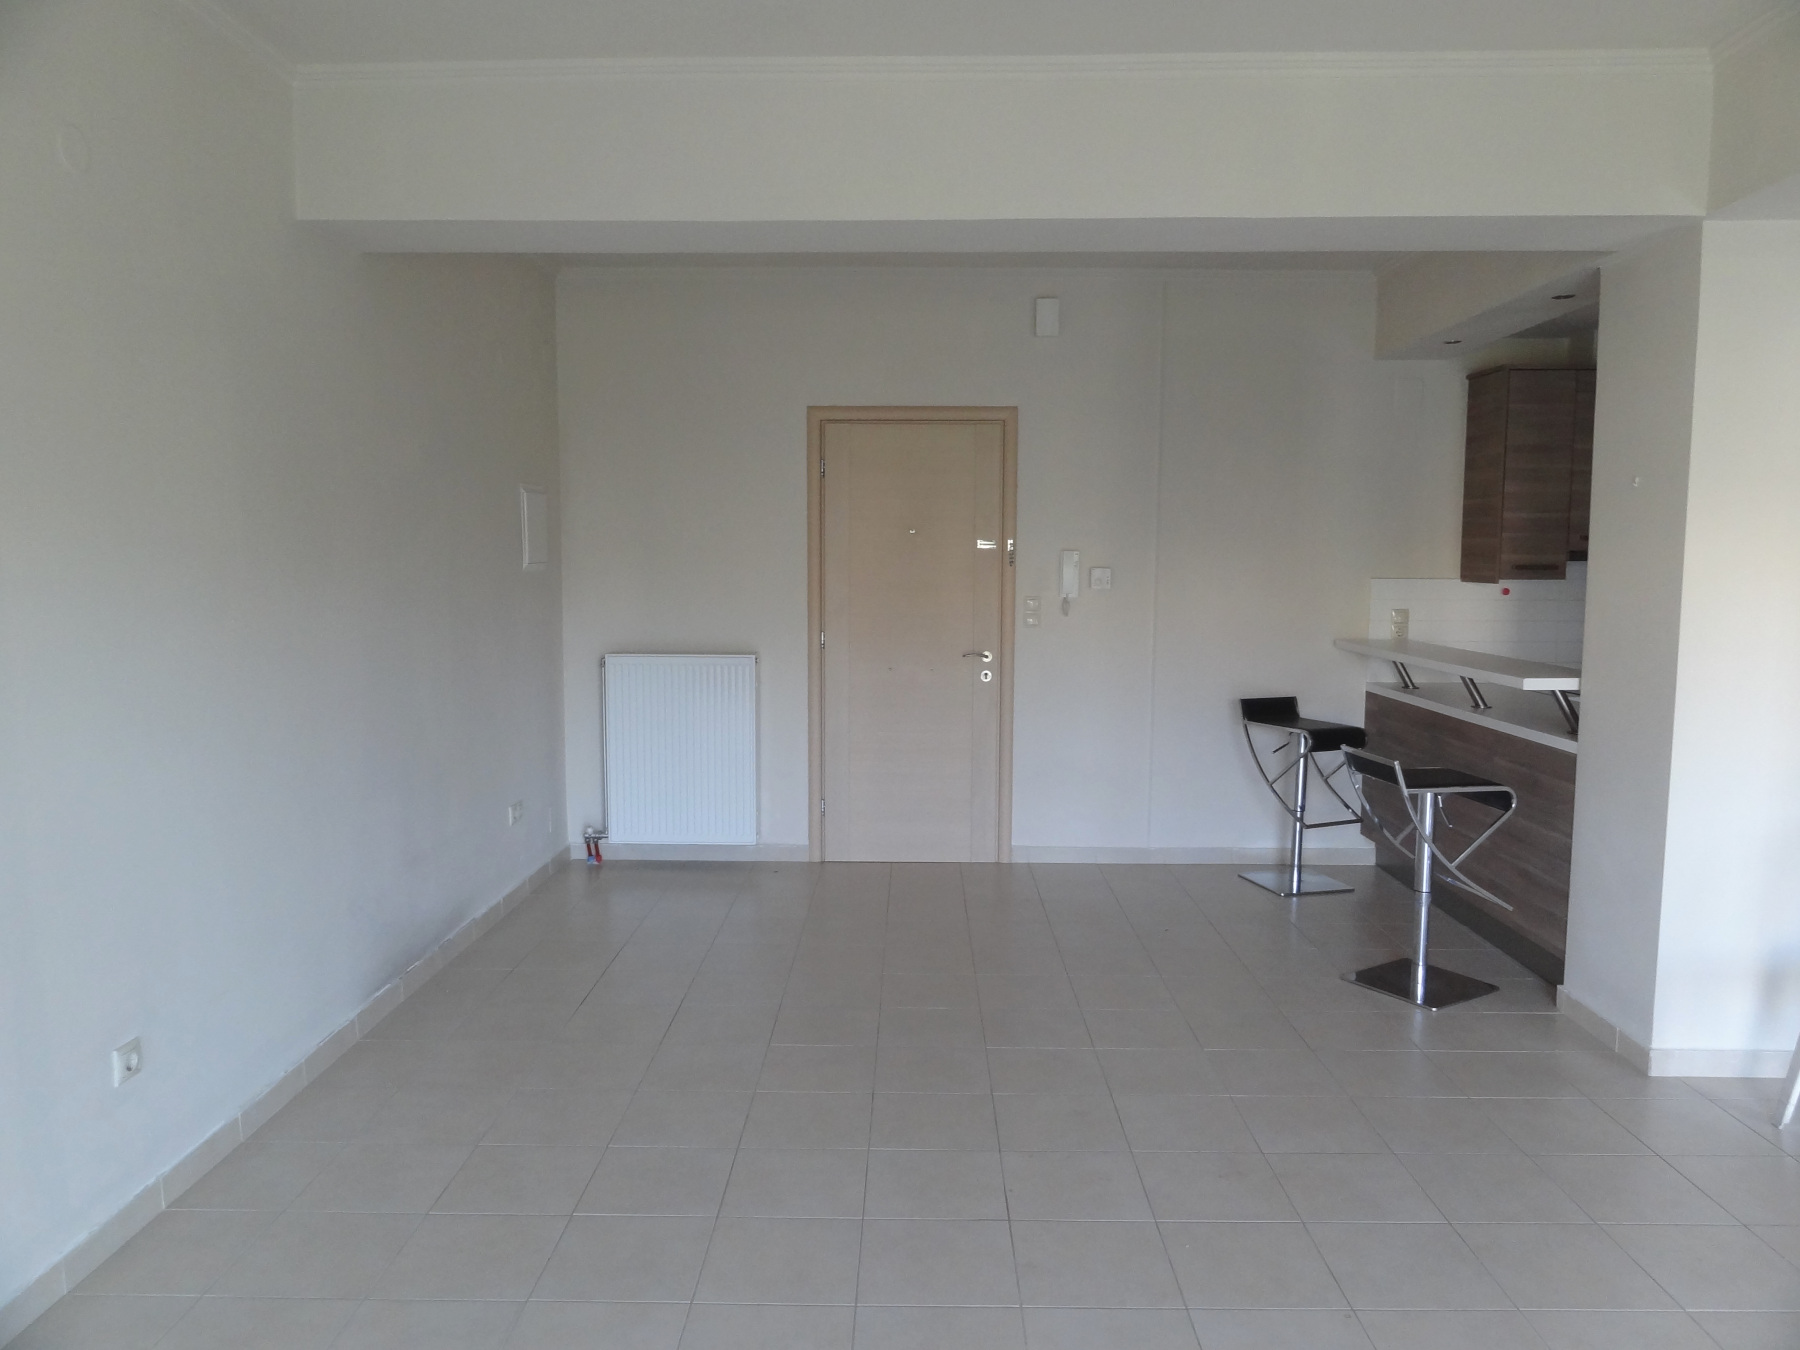 For rent, a spacious 1 bedroom apartment of 58 sq.m. 4th floor in the center of Ioannina near Dodoni Avenue